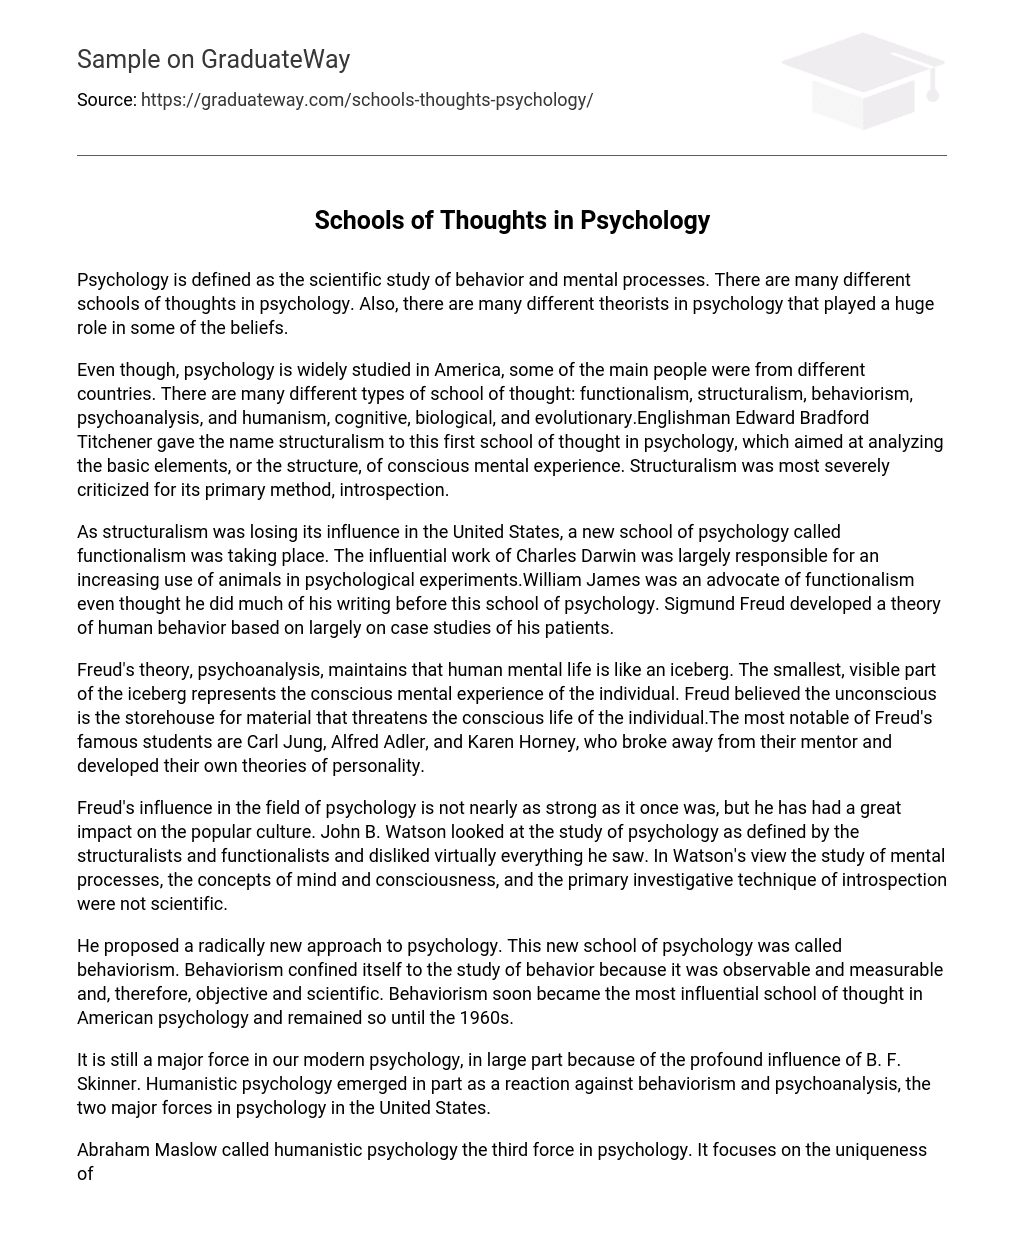 Schools of Thoughts in Psychology